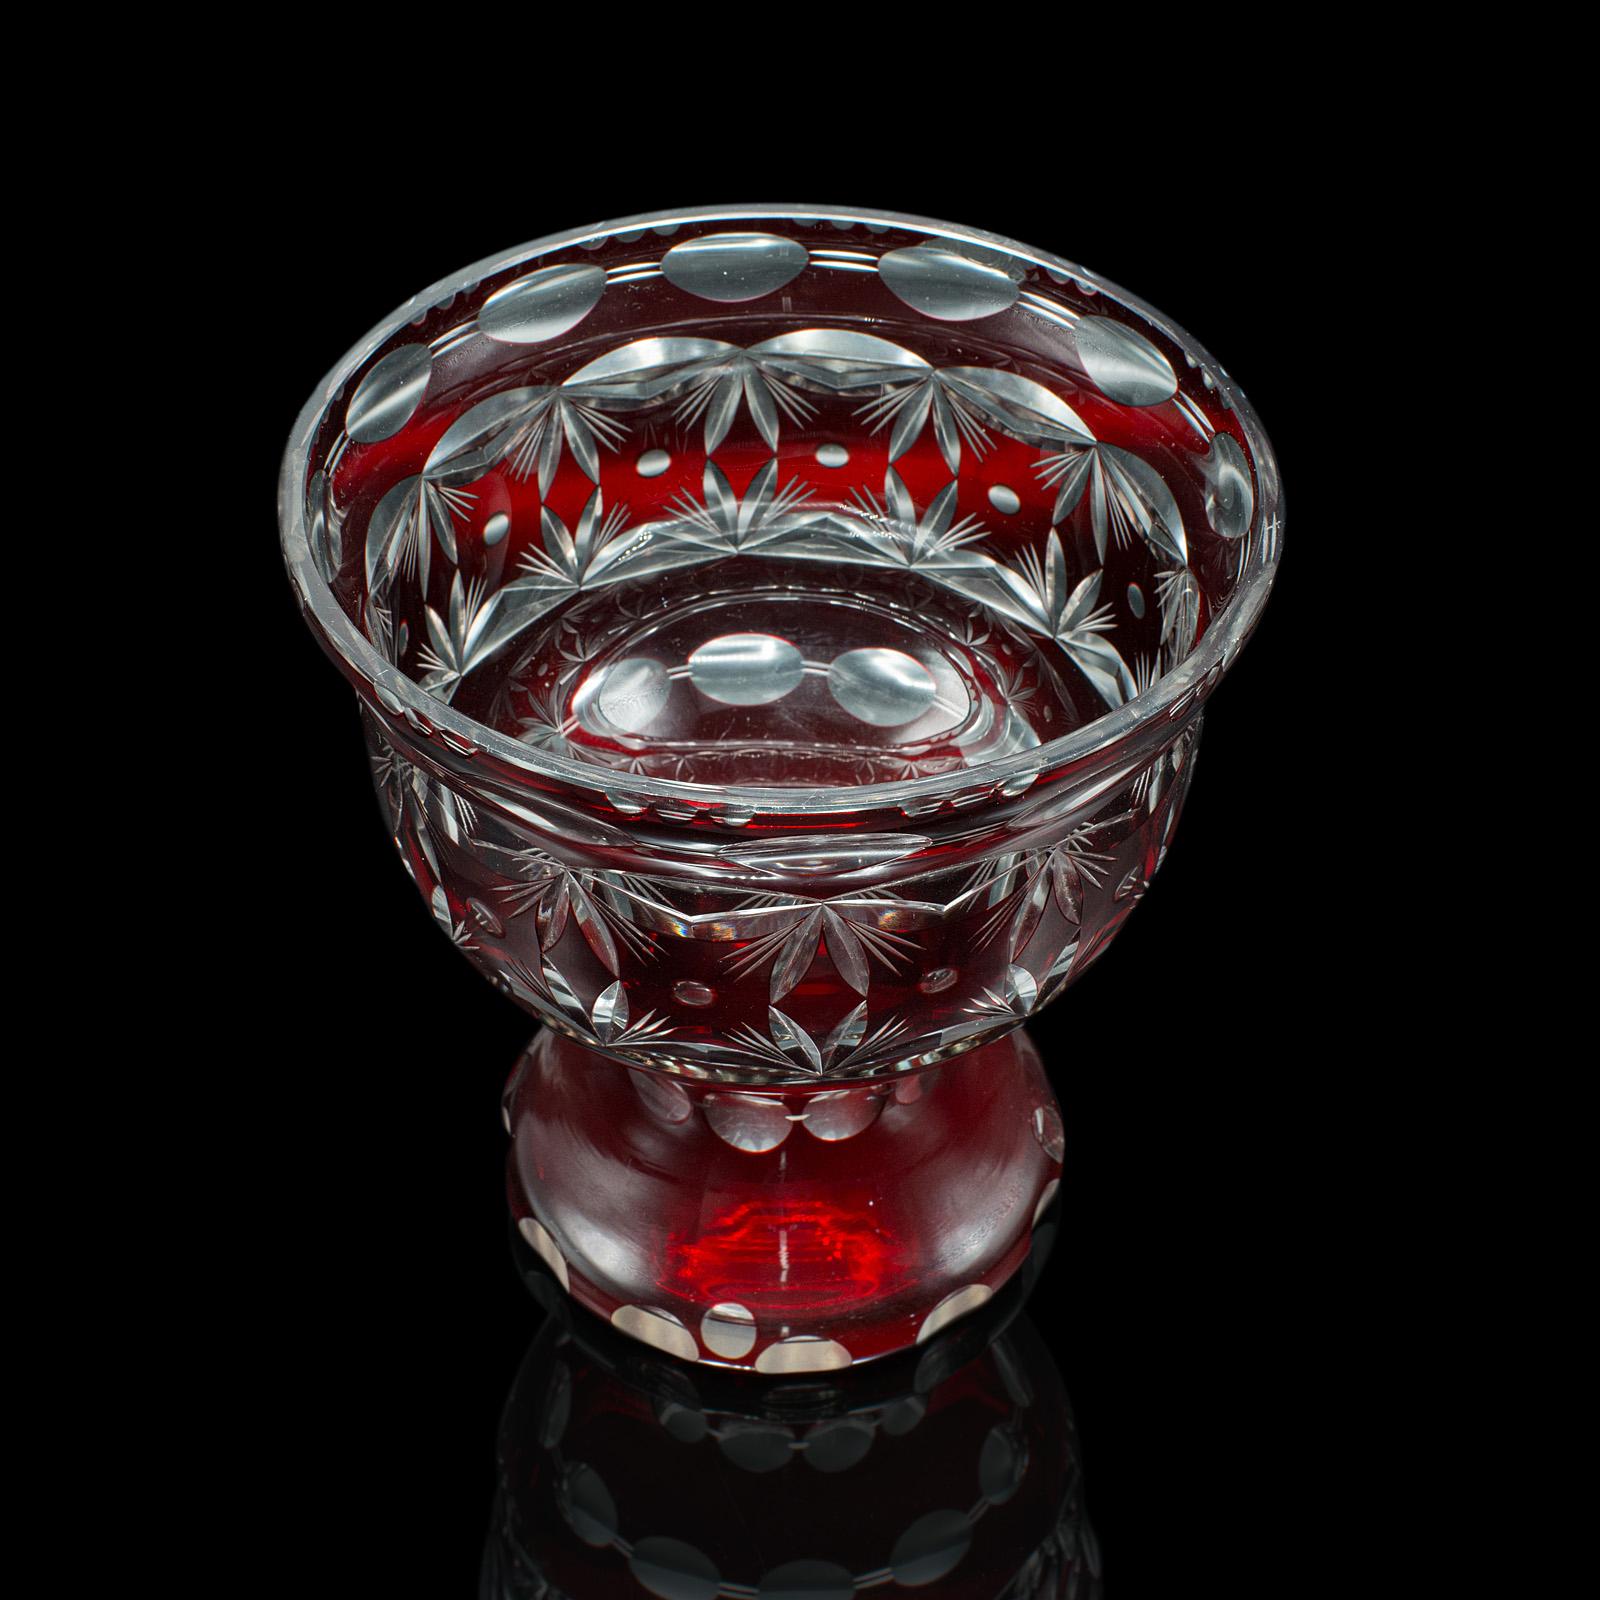 Early 20th Century Antique Pedestal Bowl, Continental, Red Glass, Decorative Ice Bucket, Circa 1920 For Sale